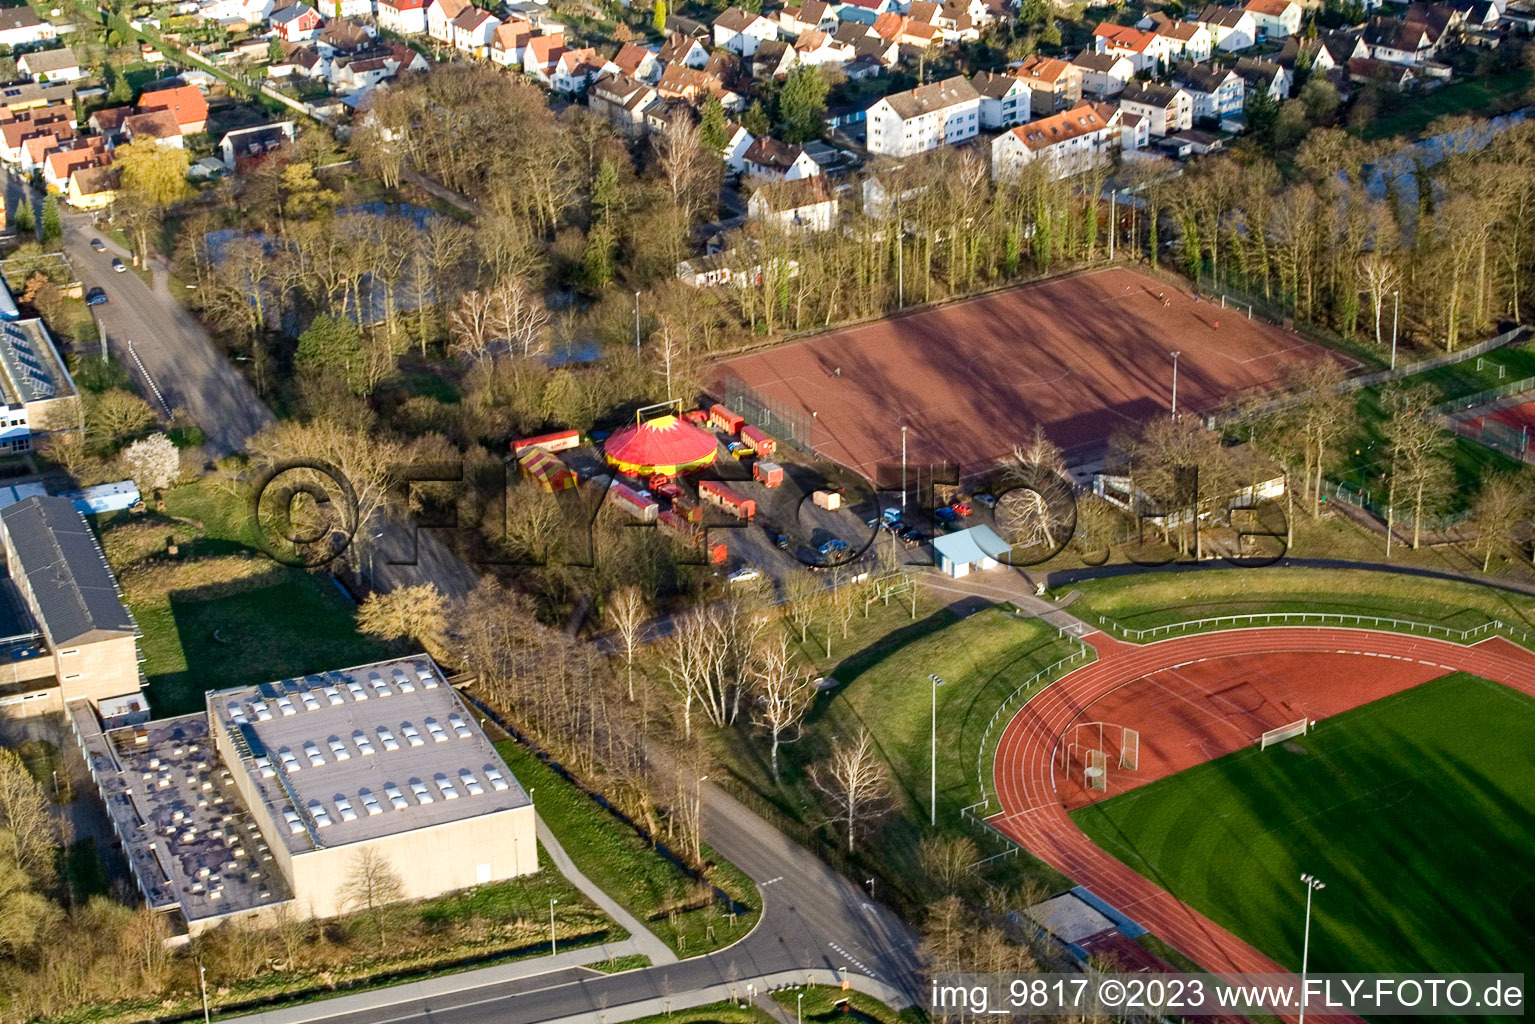 Aerial photograpy of Circus wisdom at the sports field in Kandel in the state Rhineland-Palatinate, Germany